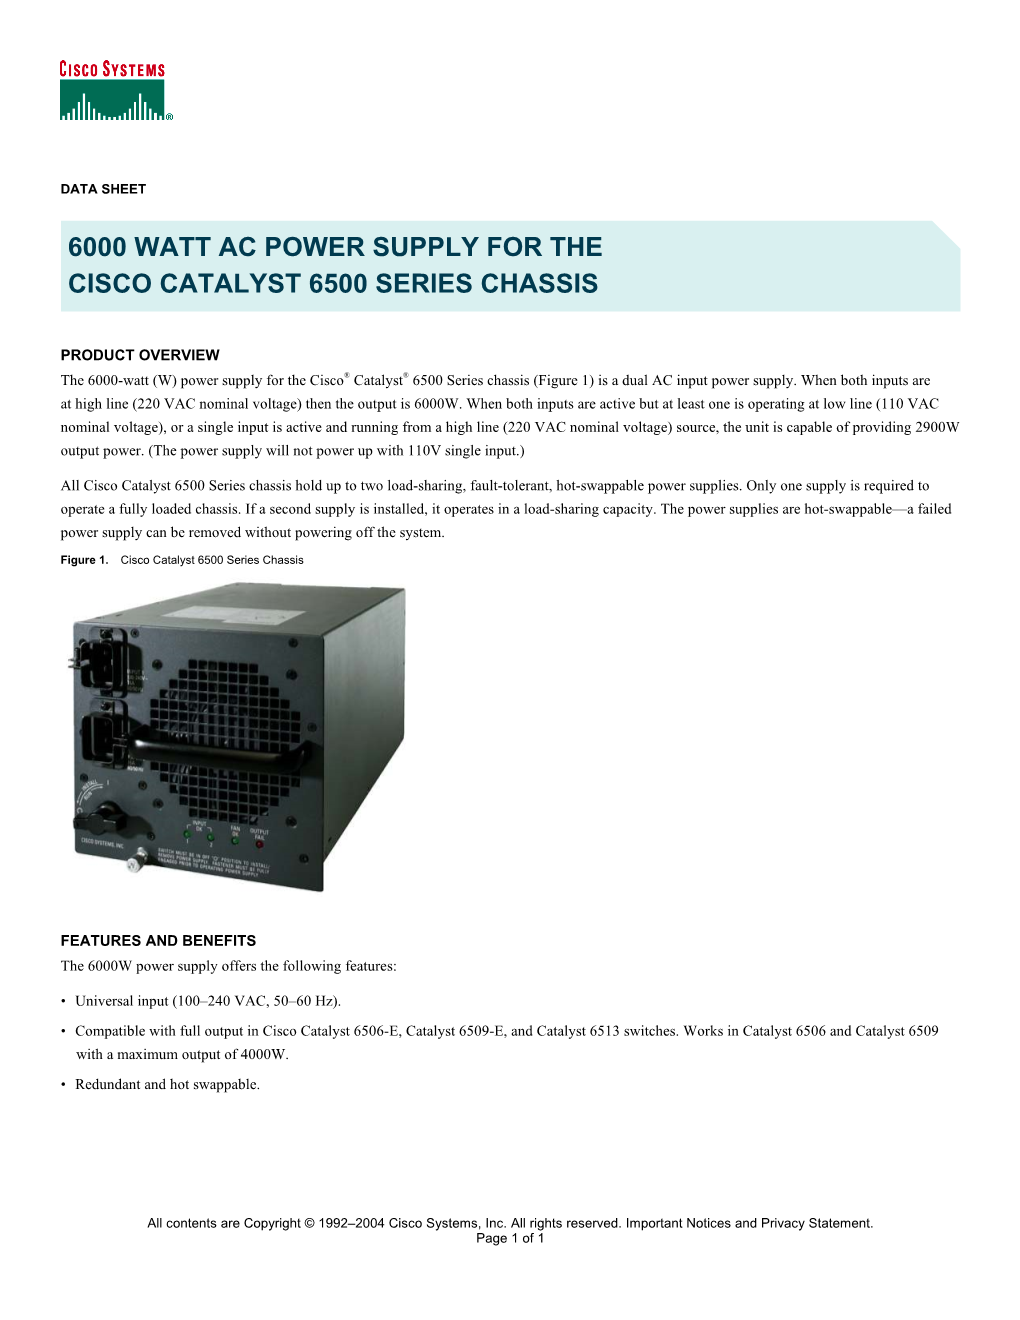 6000 Watt Ac Power Supply for the Cisco Catalyst 6500 Series Chassis